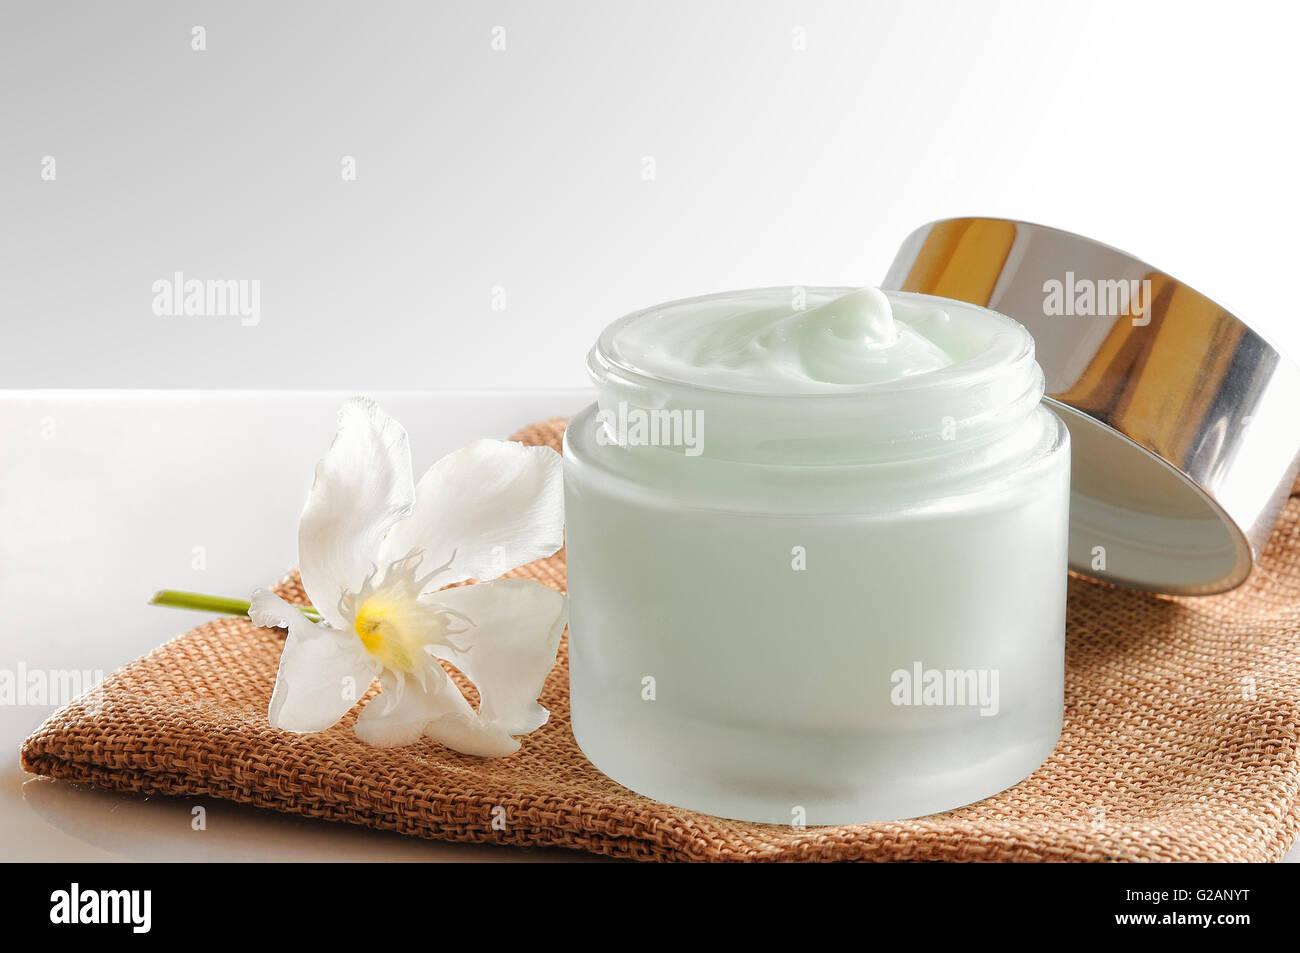 Glass open jar with facial or body cream on burlap. With lid and flower.Isolated background. Front view. Stock Photo